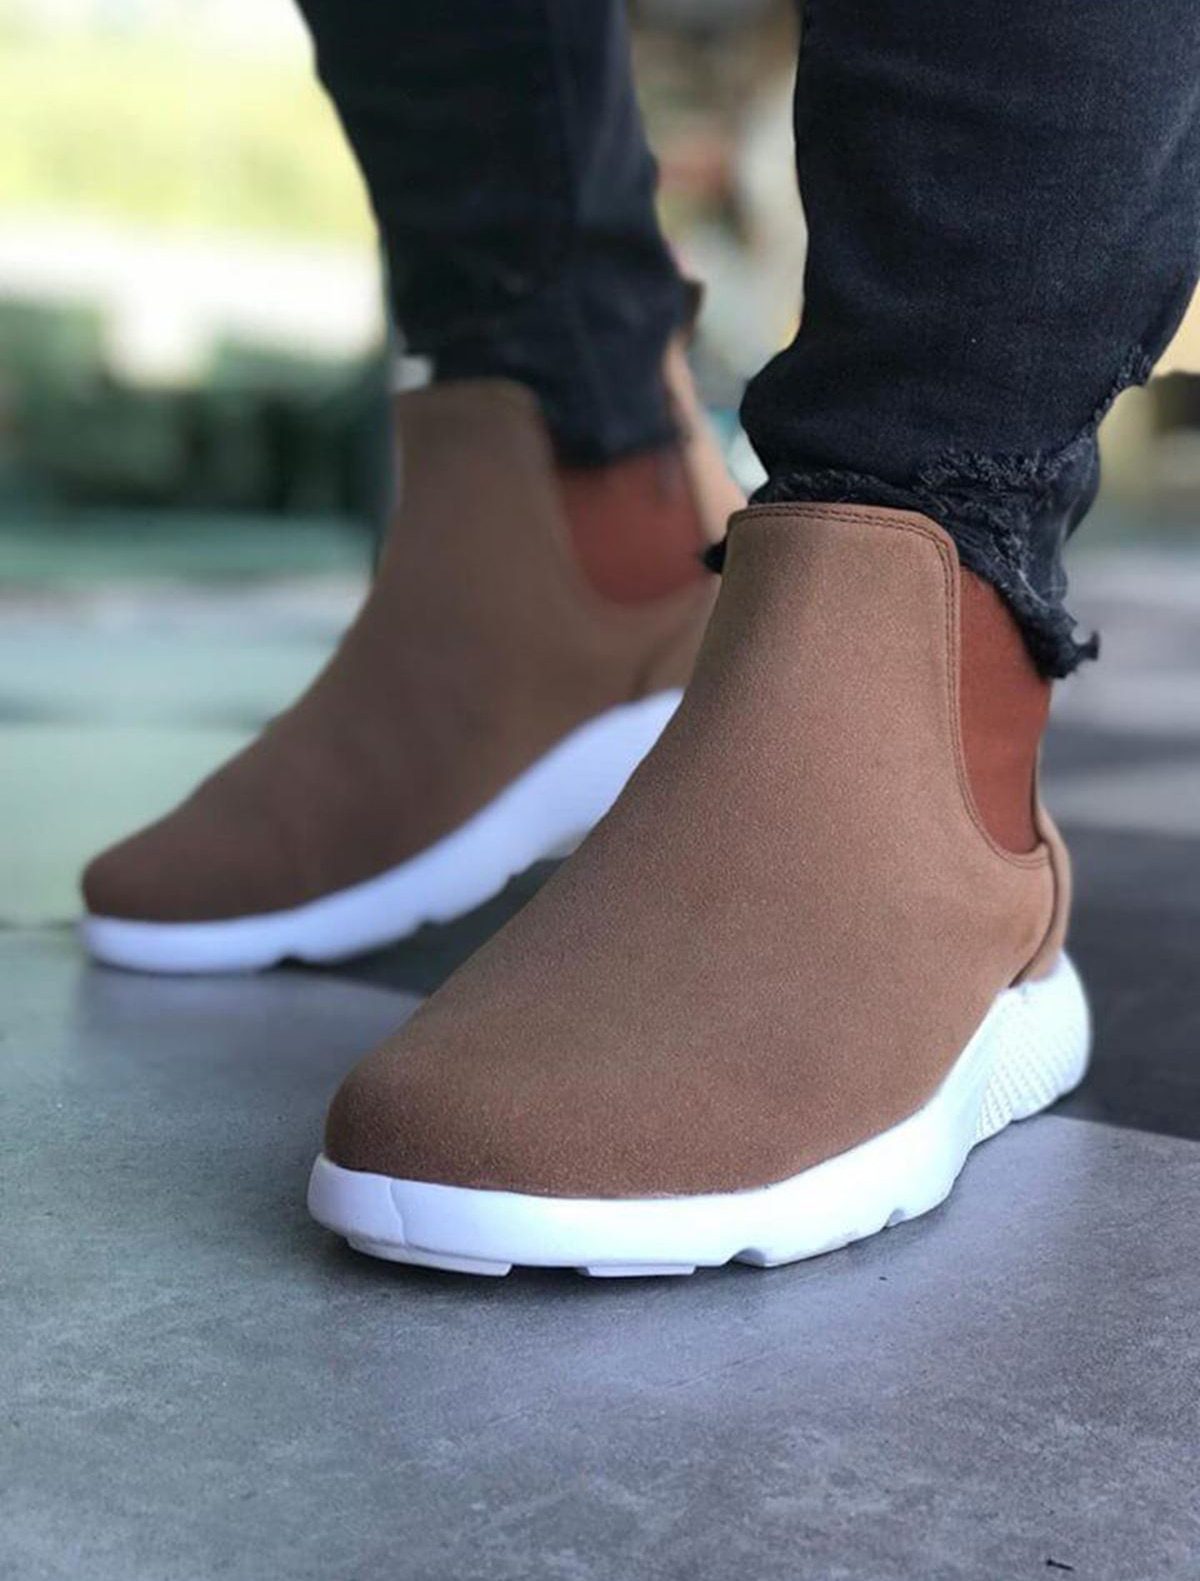 Chekich Men's Boots Khaki Color Artificial Leather 2021 Spring and Autumn Seasons Chelsea Shoes Slip On Sneakers Green Wedding Business Office Flat Sewing Comfortable White Base Flexible Outdoor Camping Nature CH049 V4